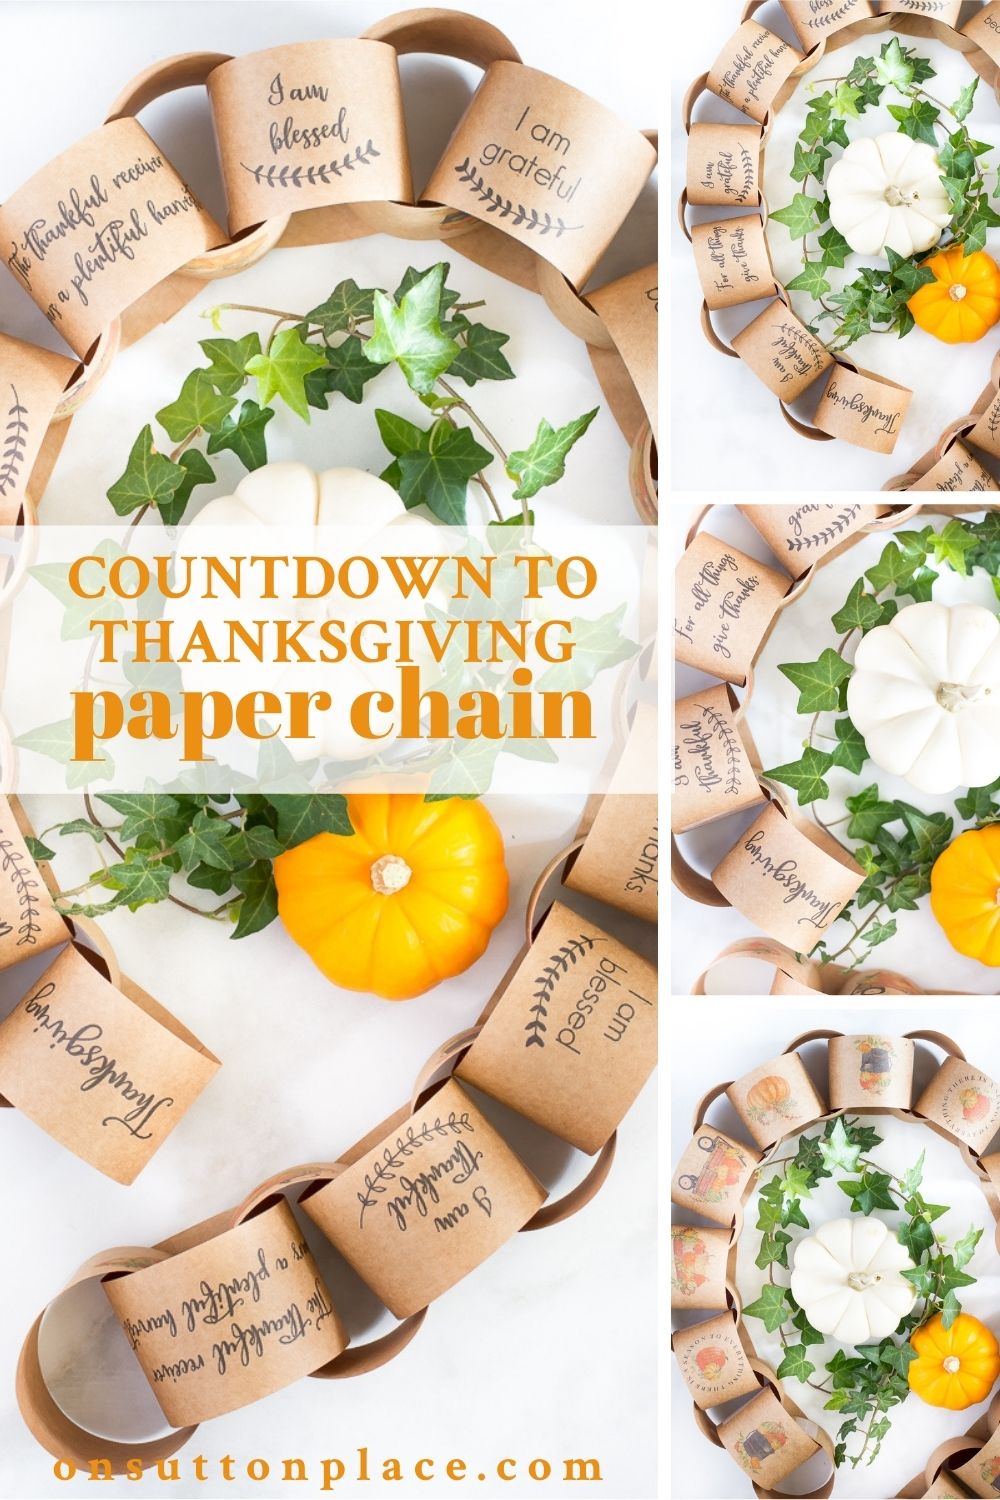 Countdown to Thanksgiving Paper Chain Printable On Sutton Place